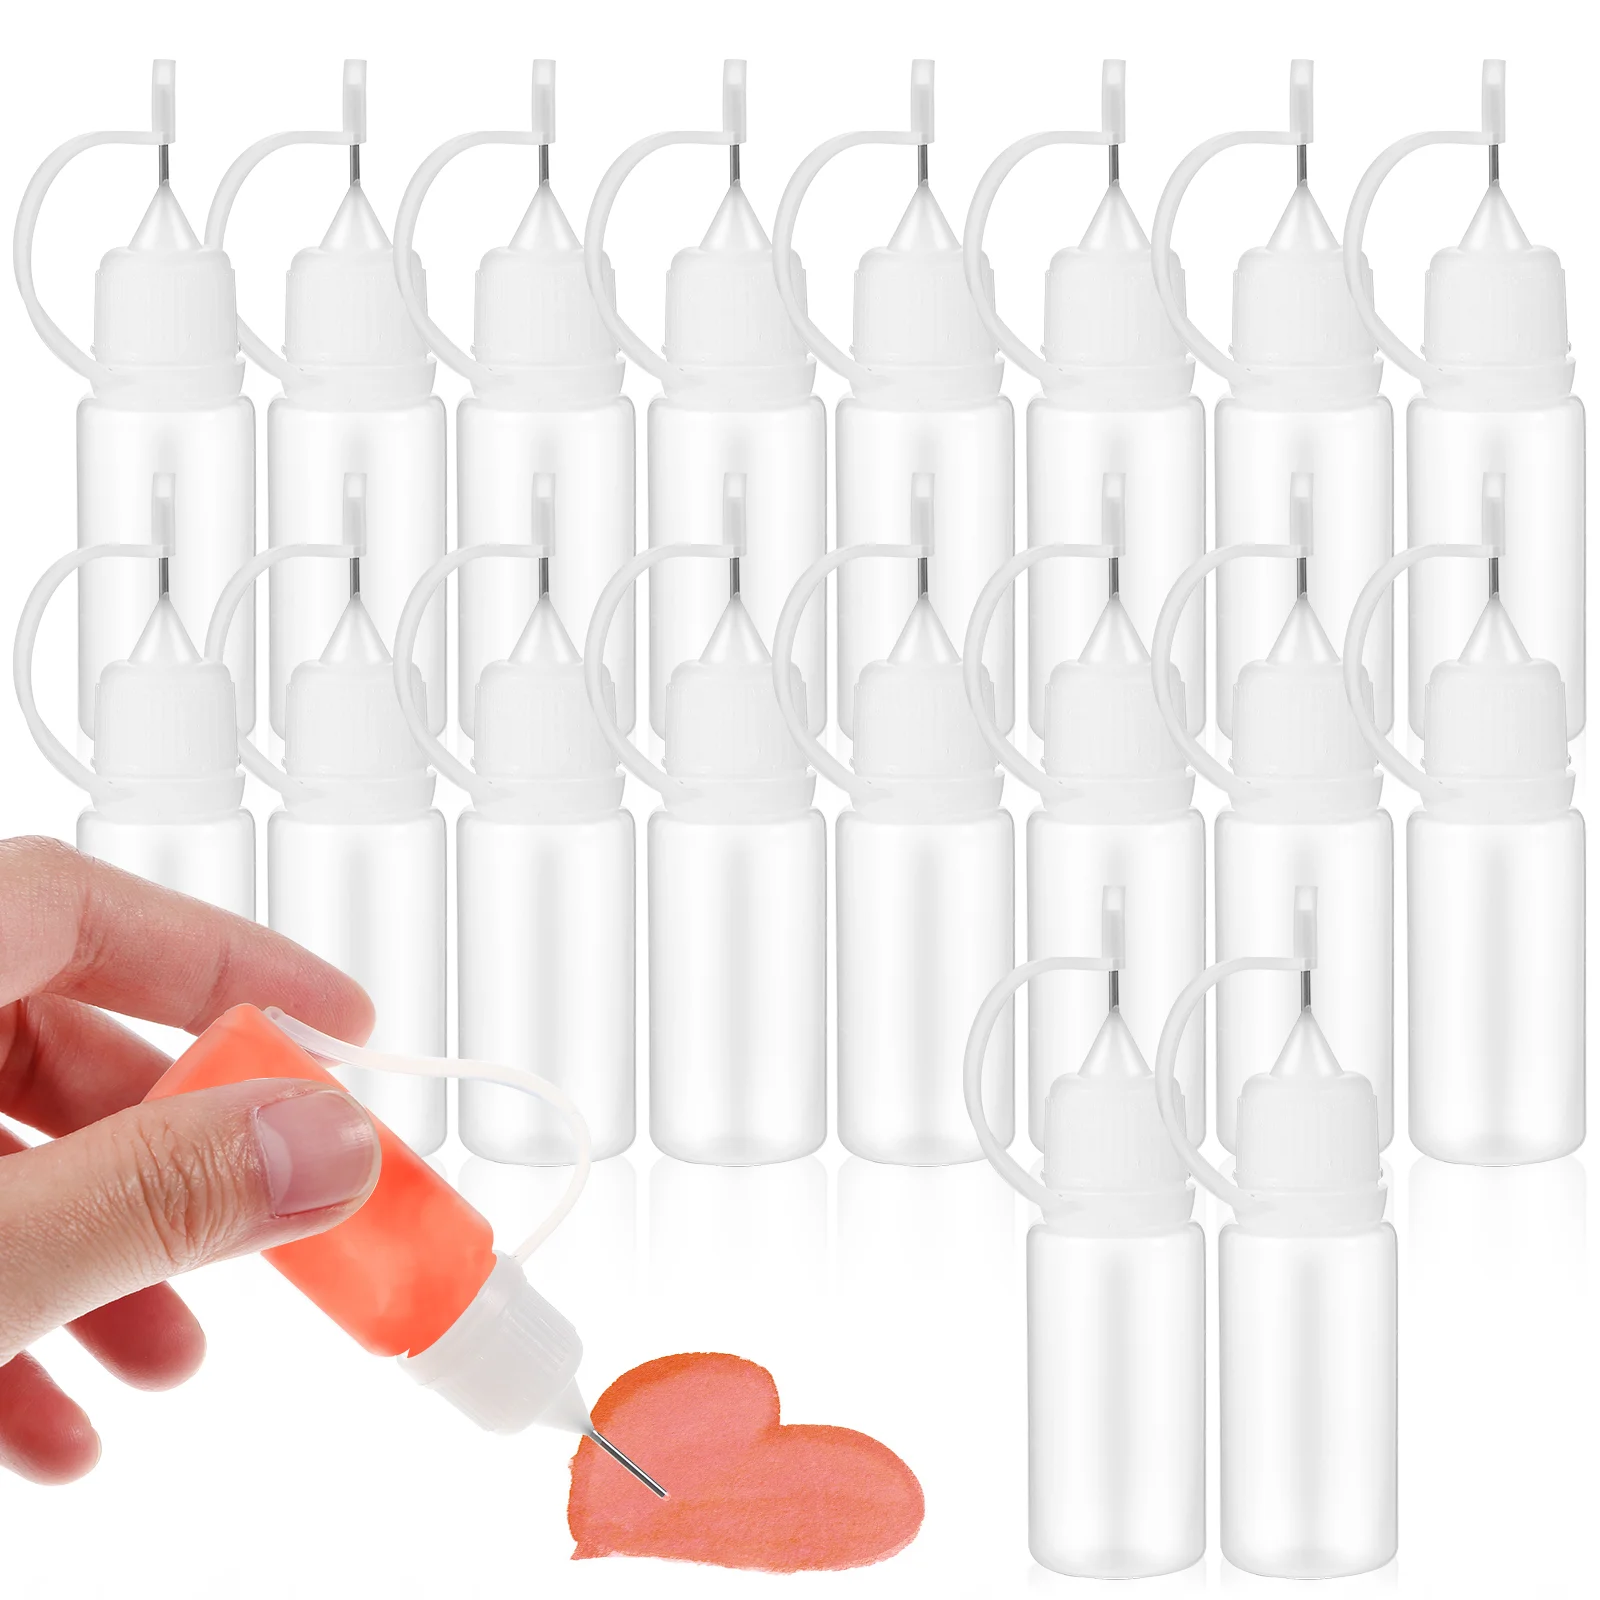 

20 Pcs Plastic Dropper Bottle Needle Tip Applicator The Gluing Projects Glue Shaker Precision Clear